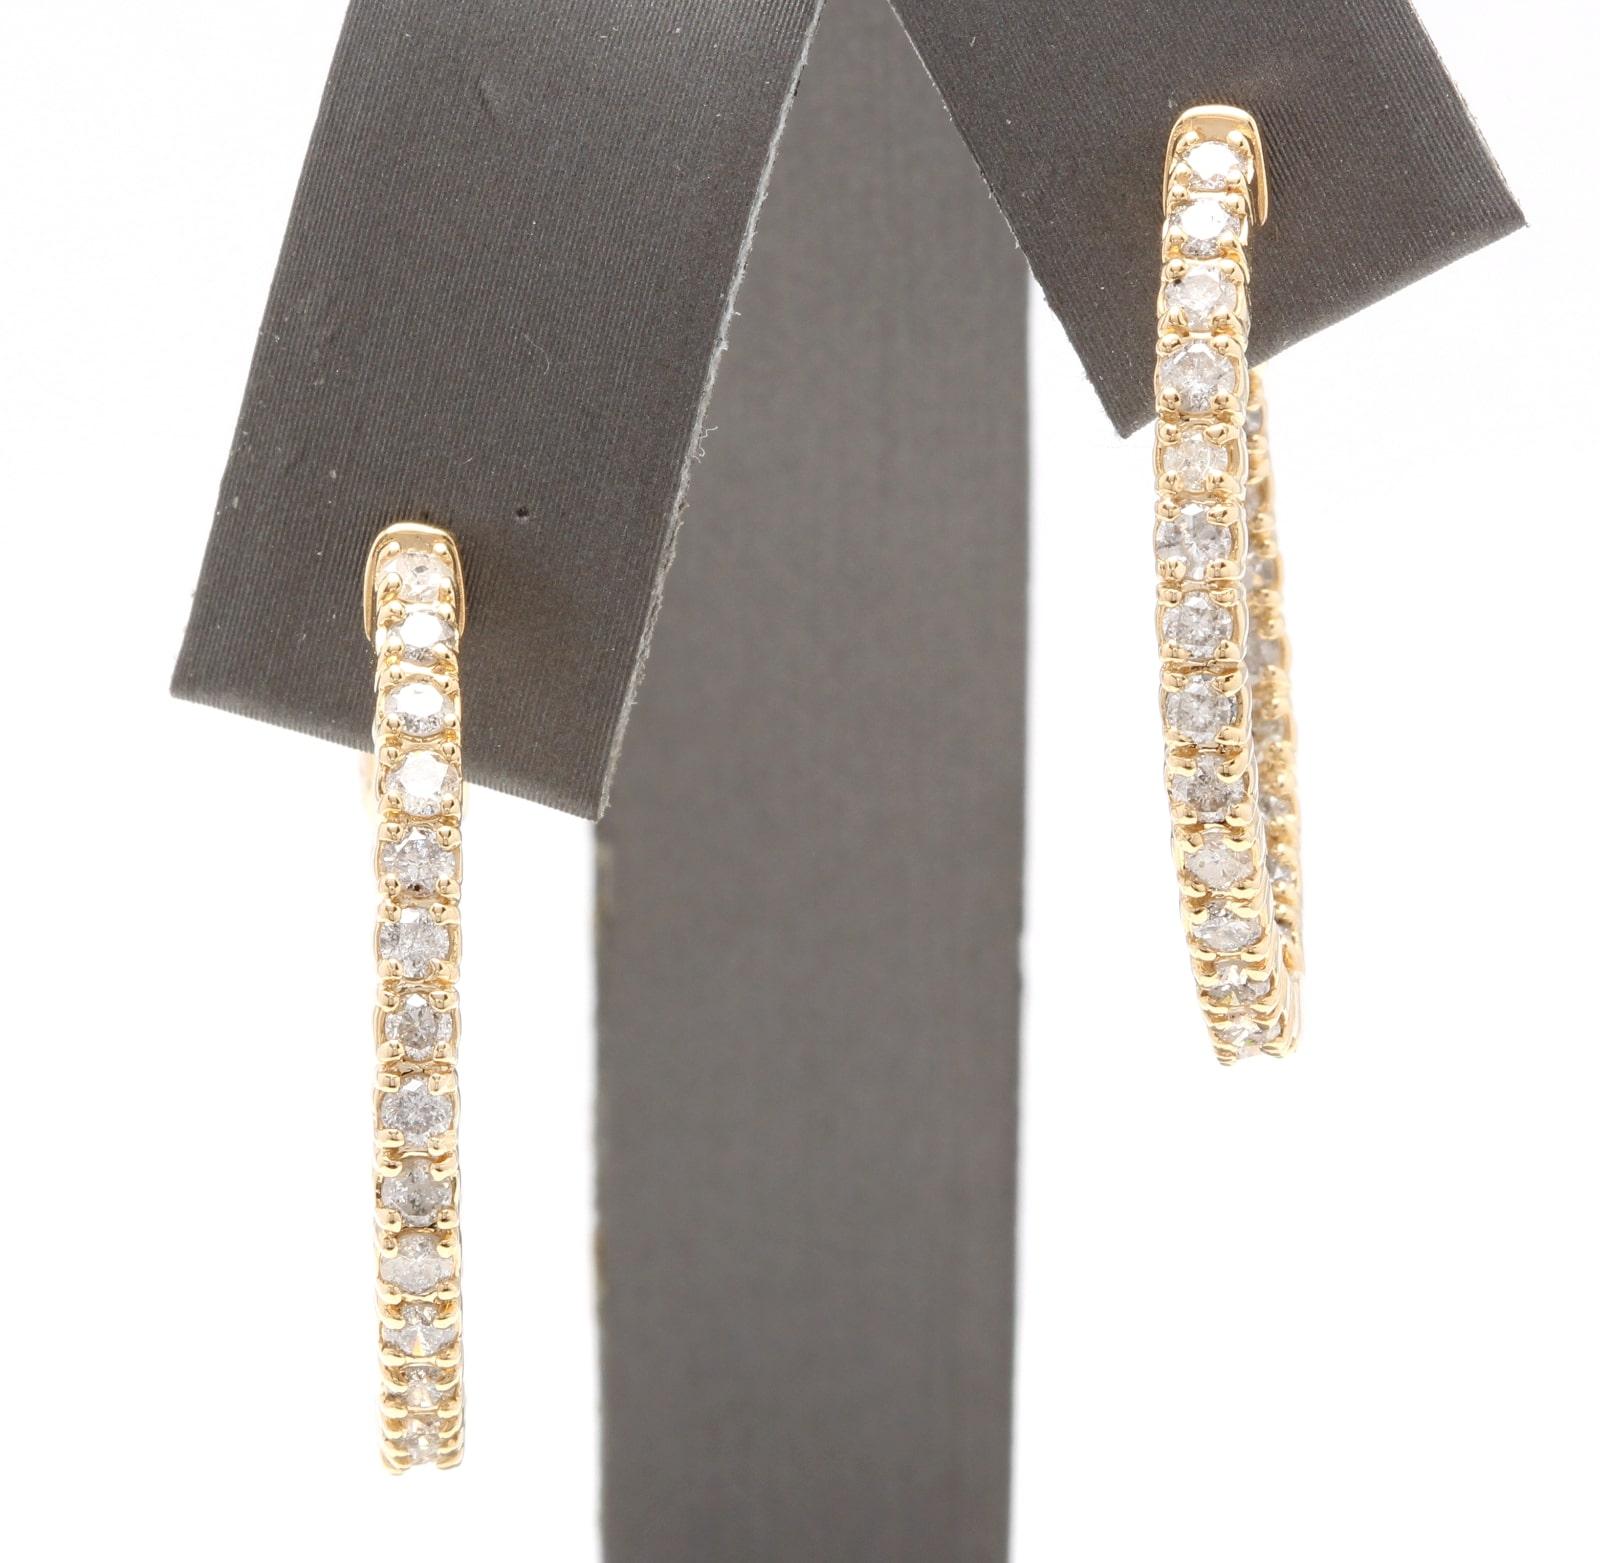 Exquisite 2.25 Carats Natural Diamond 14K Solid Yellow Gold Hoop Earrings

Amazing looking piece!

Inside Out Diamonds.

Earrings have safety lock.

Total Natural Round Cut White Diamonds Weight: Approx. 2.25 Carats (color G-H / Clarity